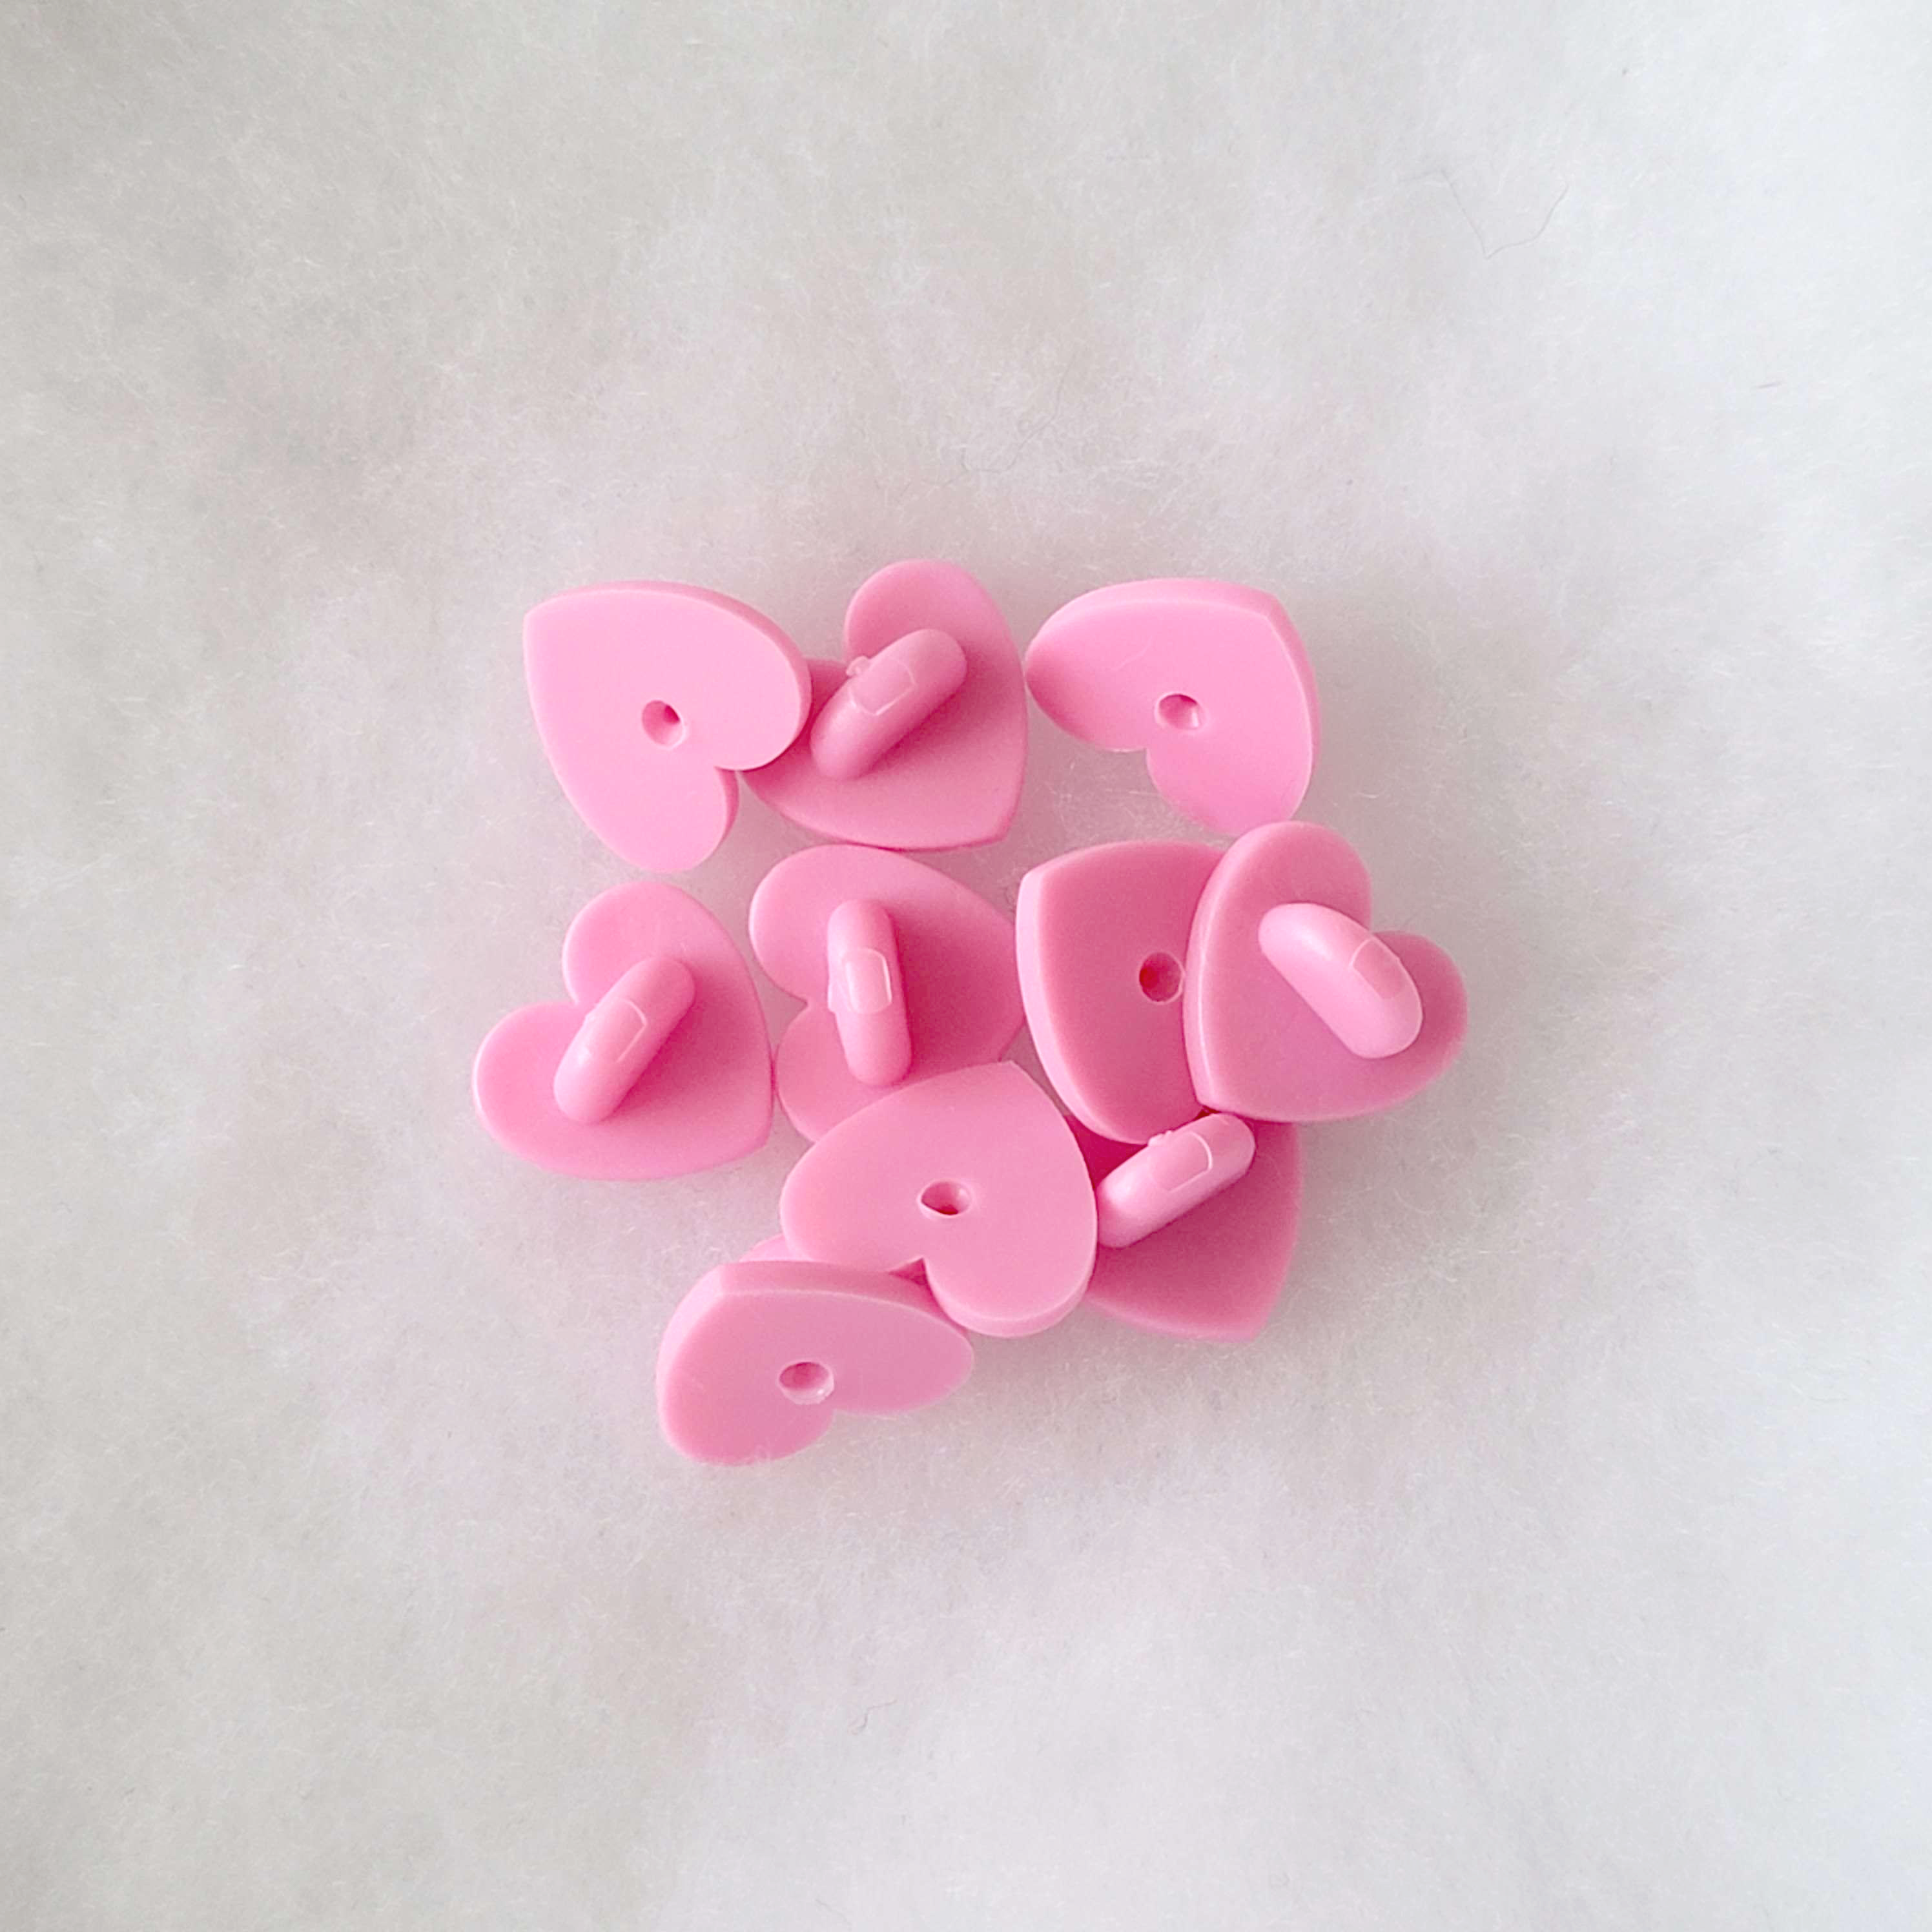 Baby Pink Rubber Pin Backs / Clutches– Xhilyn